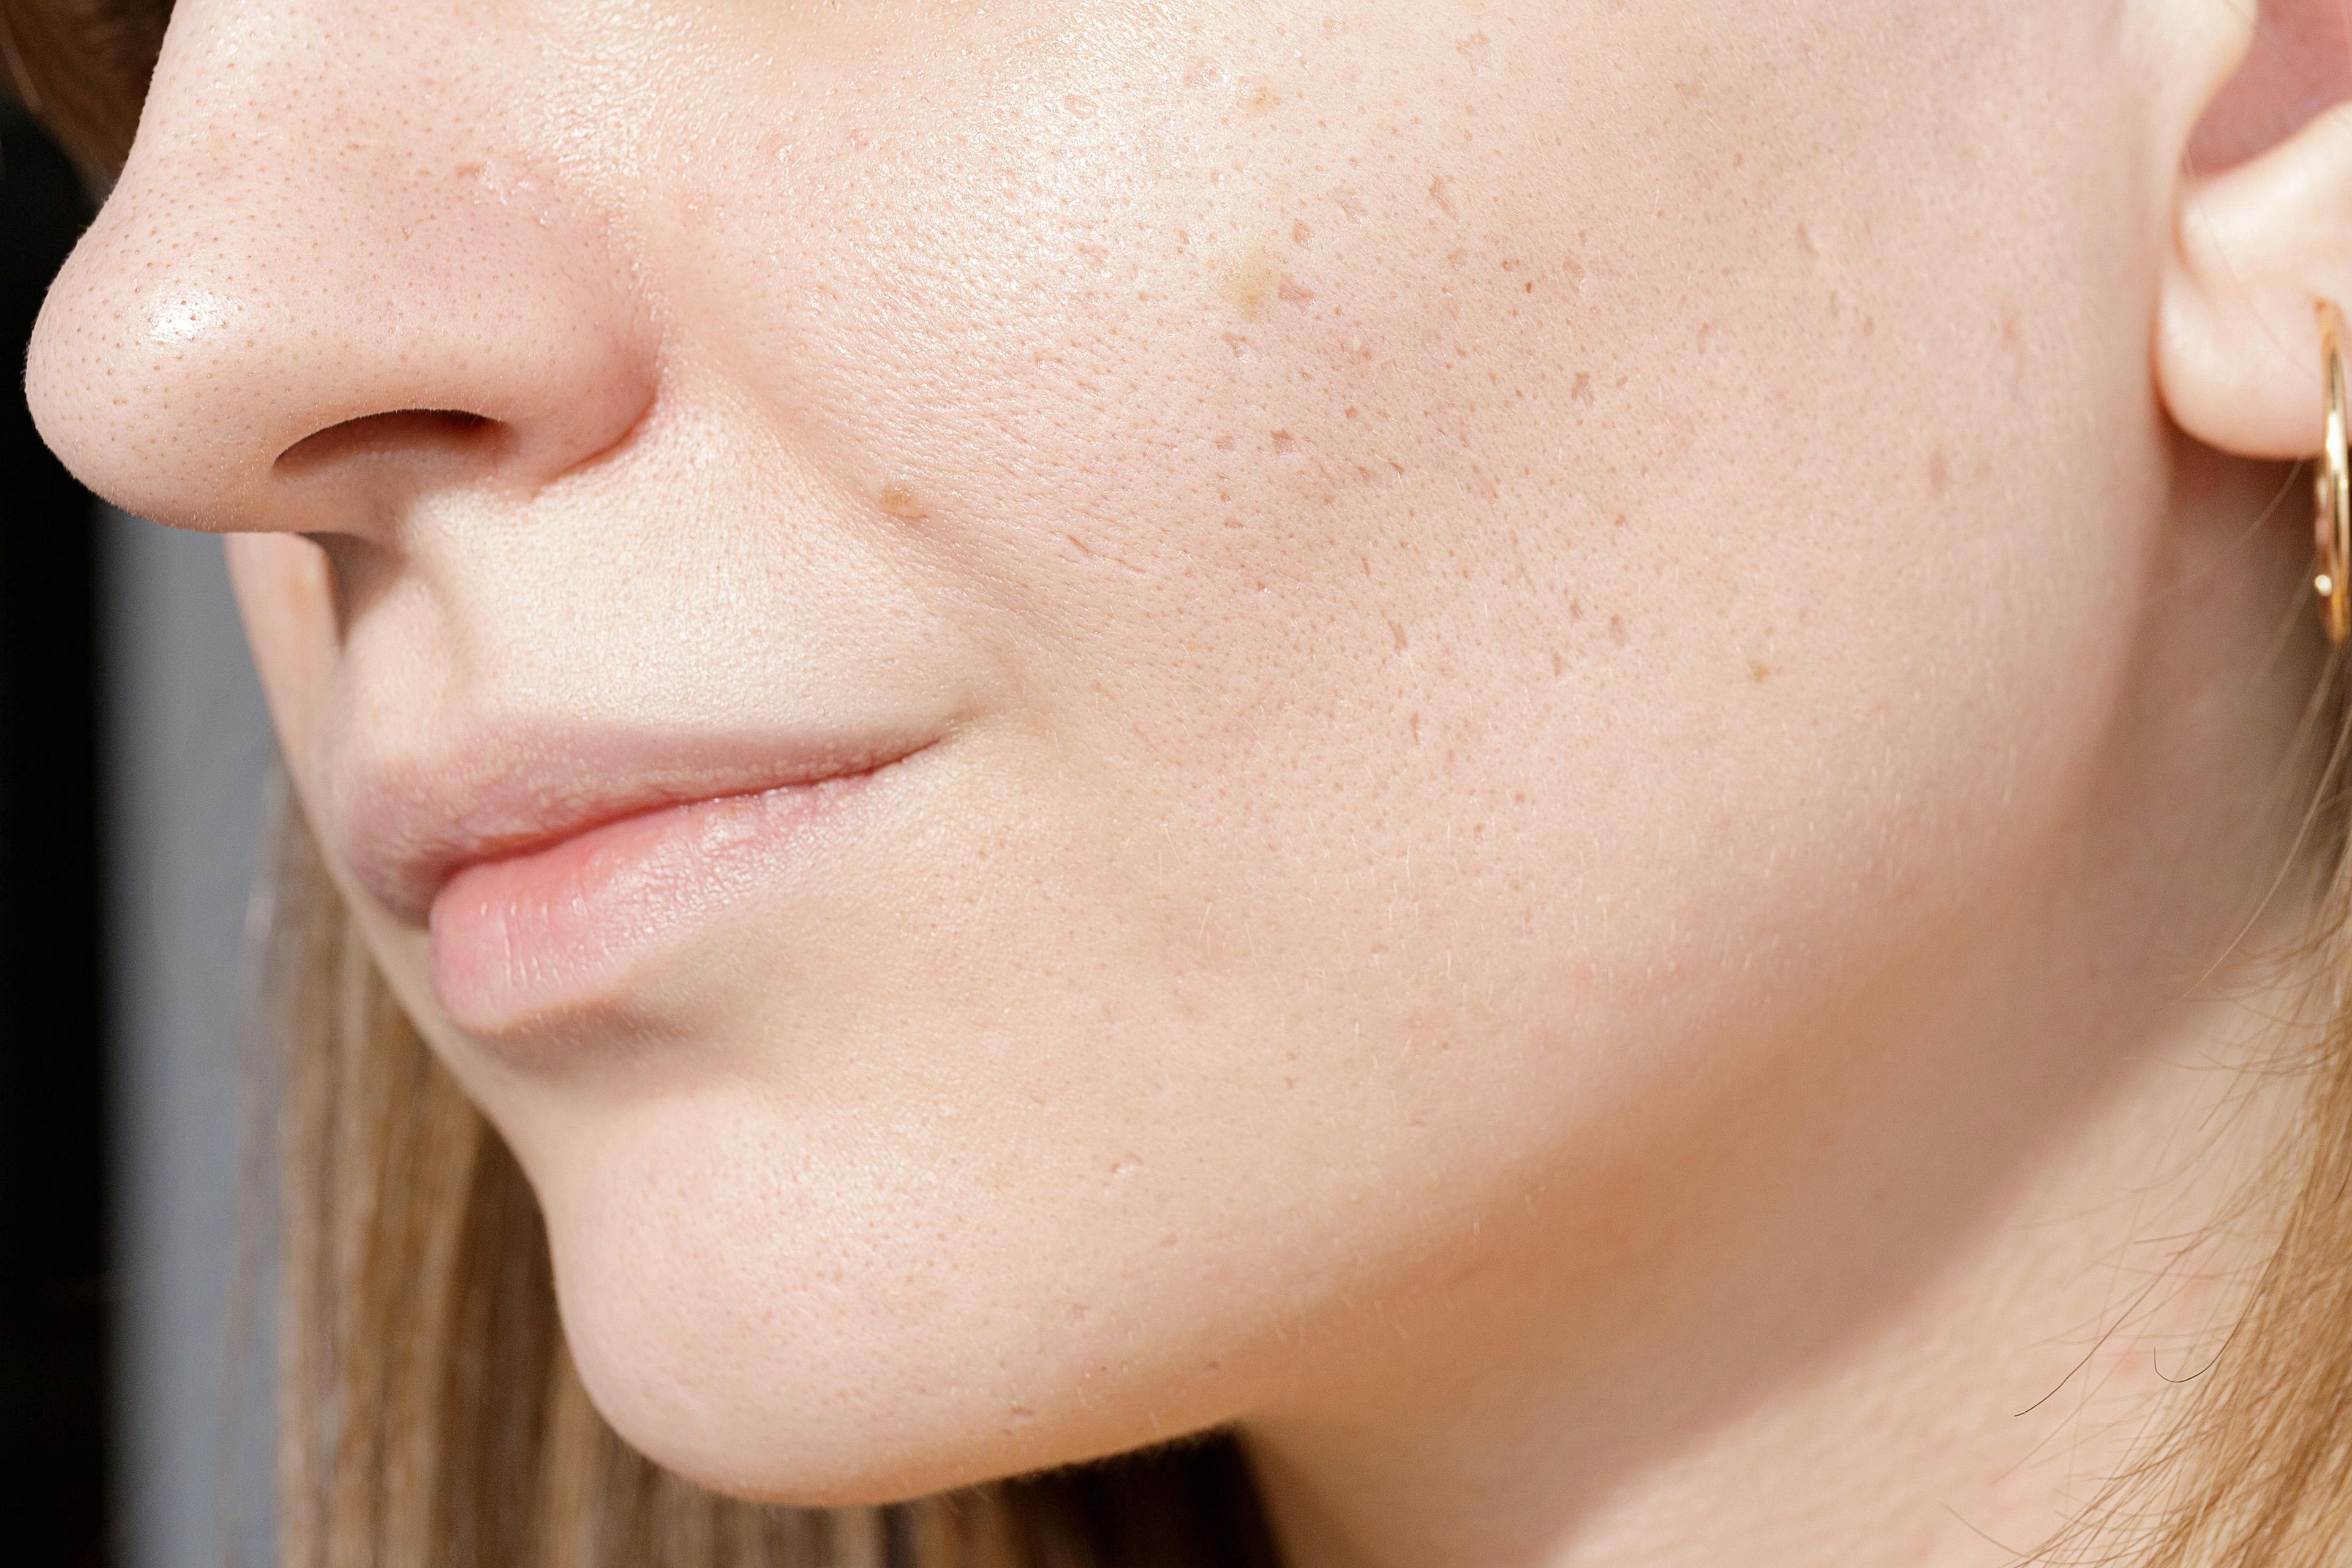 Fractional Picosecond Laser is an Effective Treatment For Atrophic Acne Scars